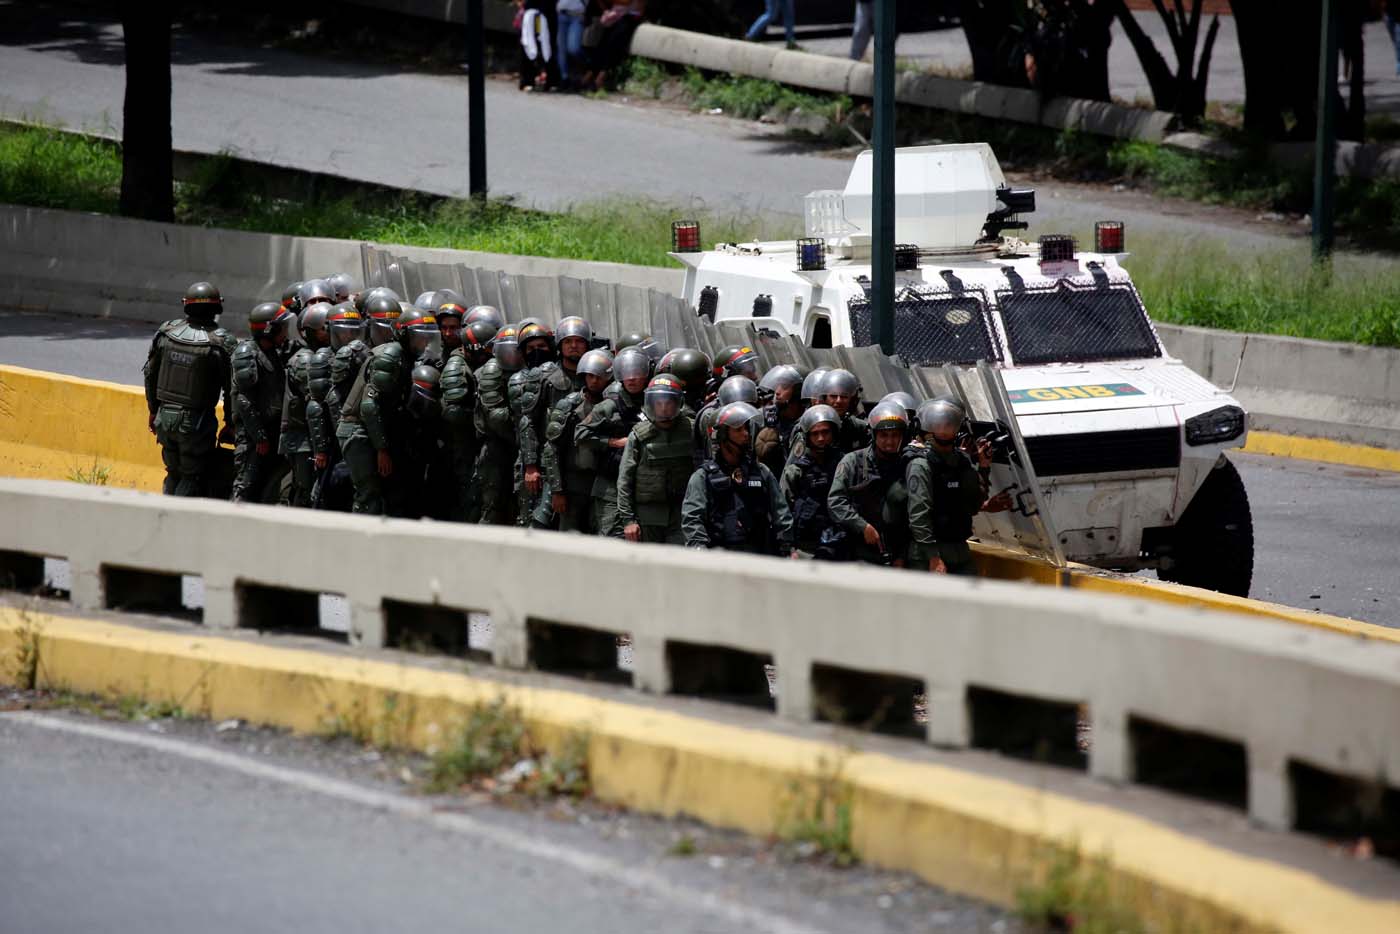 Riot security forces take position during a strike called to protest against Venezuelan President Nicolas Maduro's government in Caracas, Venezuela, July 20, 2017. REUTERS/Carlos Garcia Rawlins